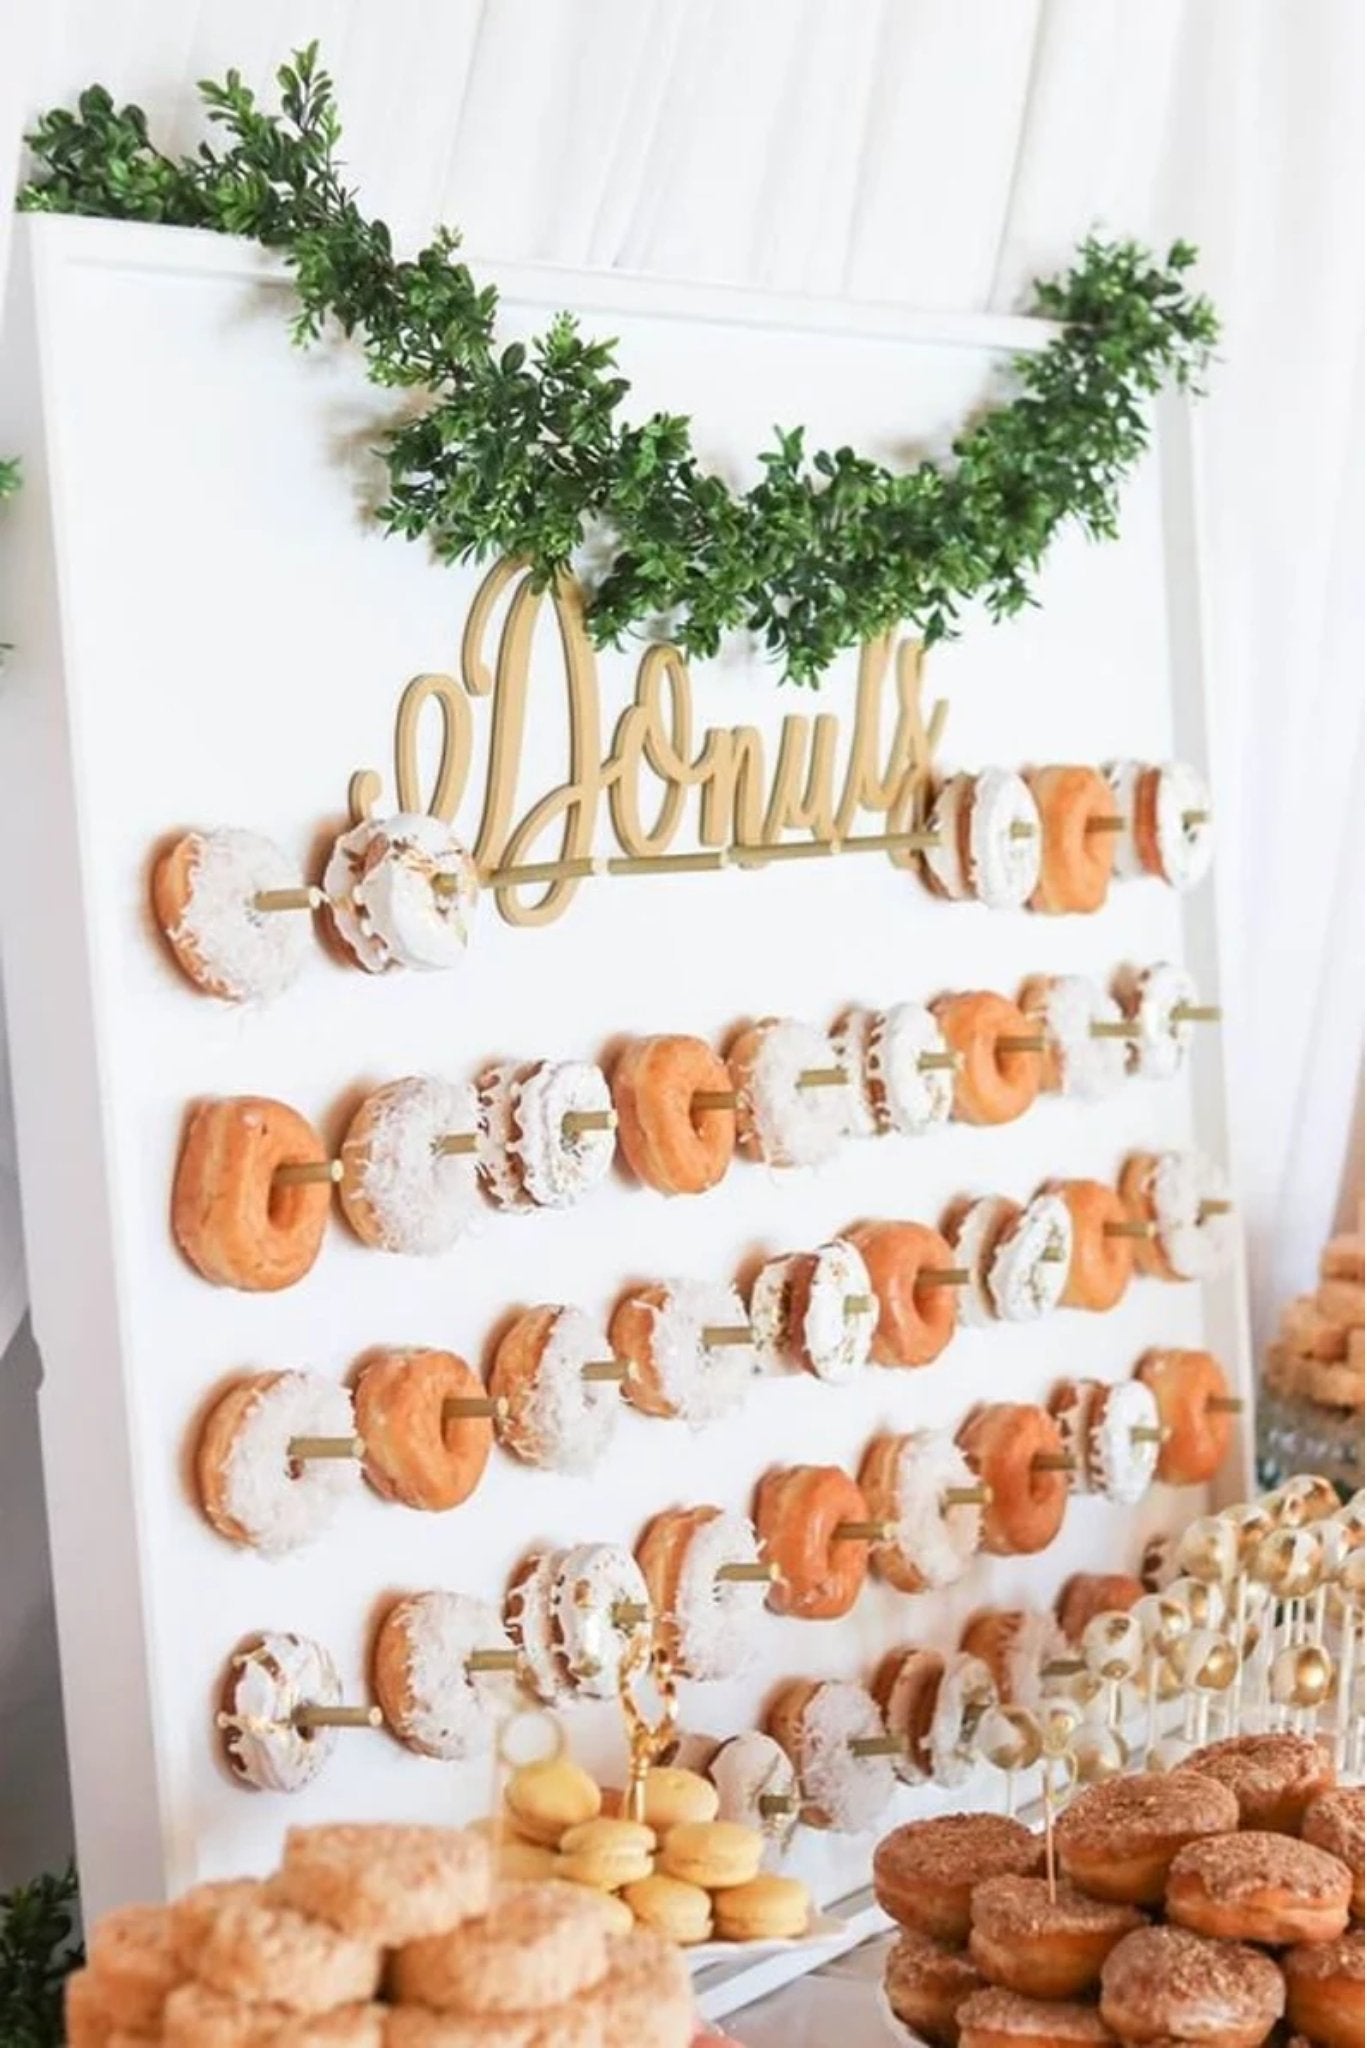 Wedding Dessert Table Ideas 2022 - Donut Edition - Pretty Collected